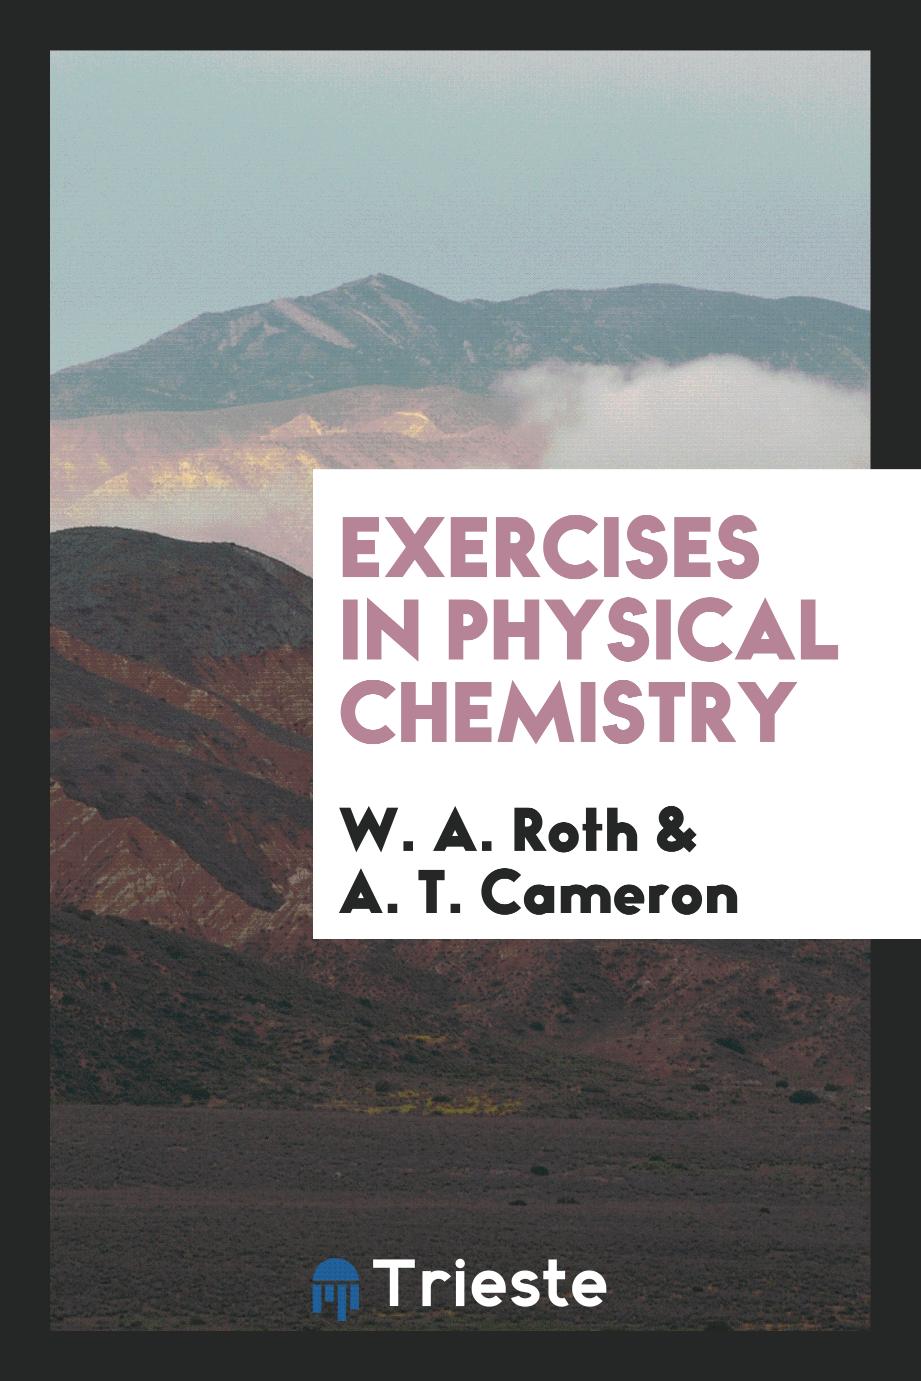 Exercises in physical chemistry